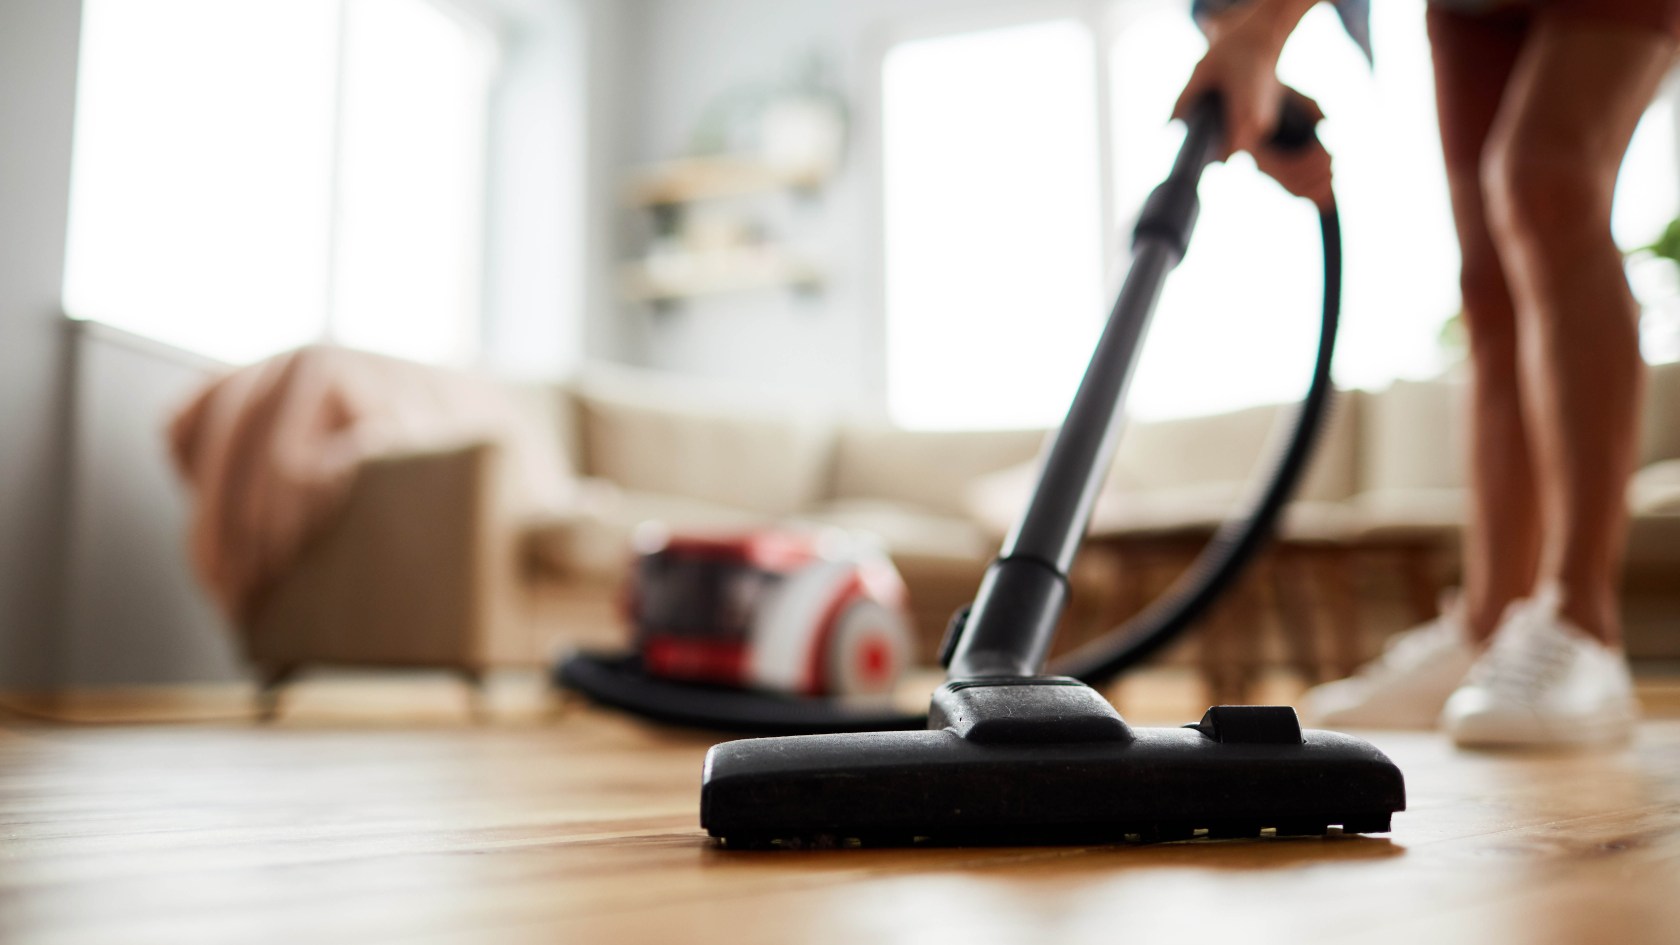 A person vacuums the floor of a home.